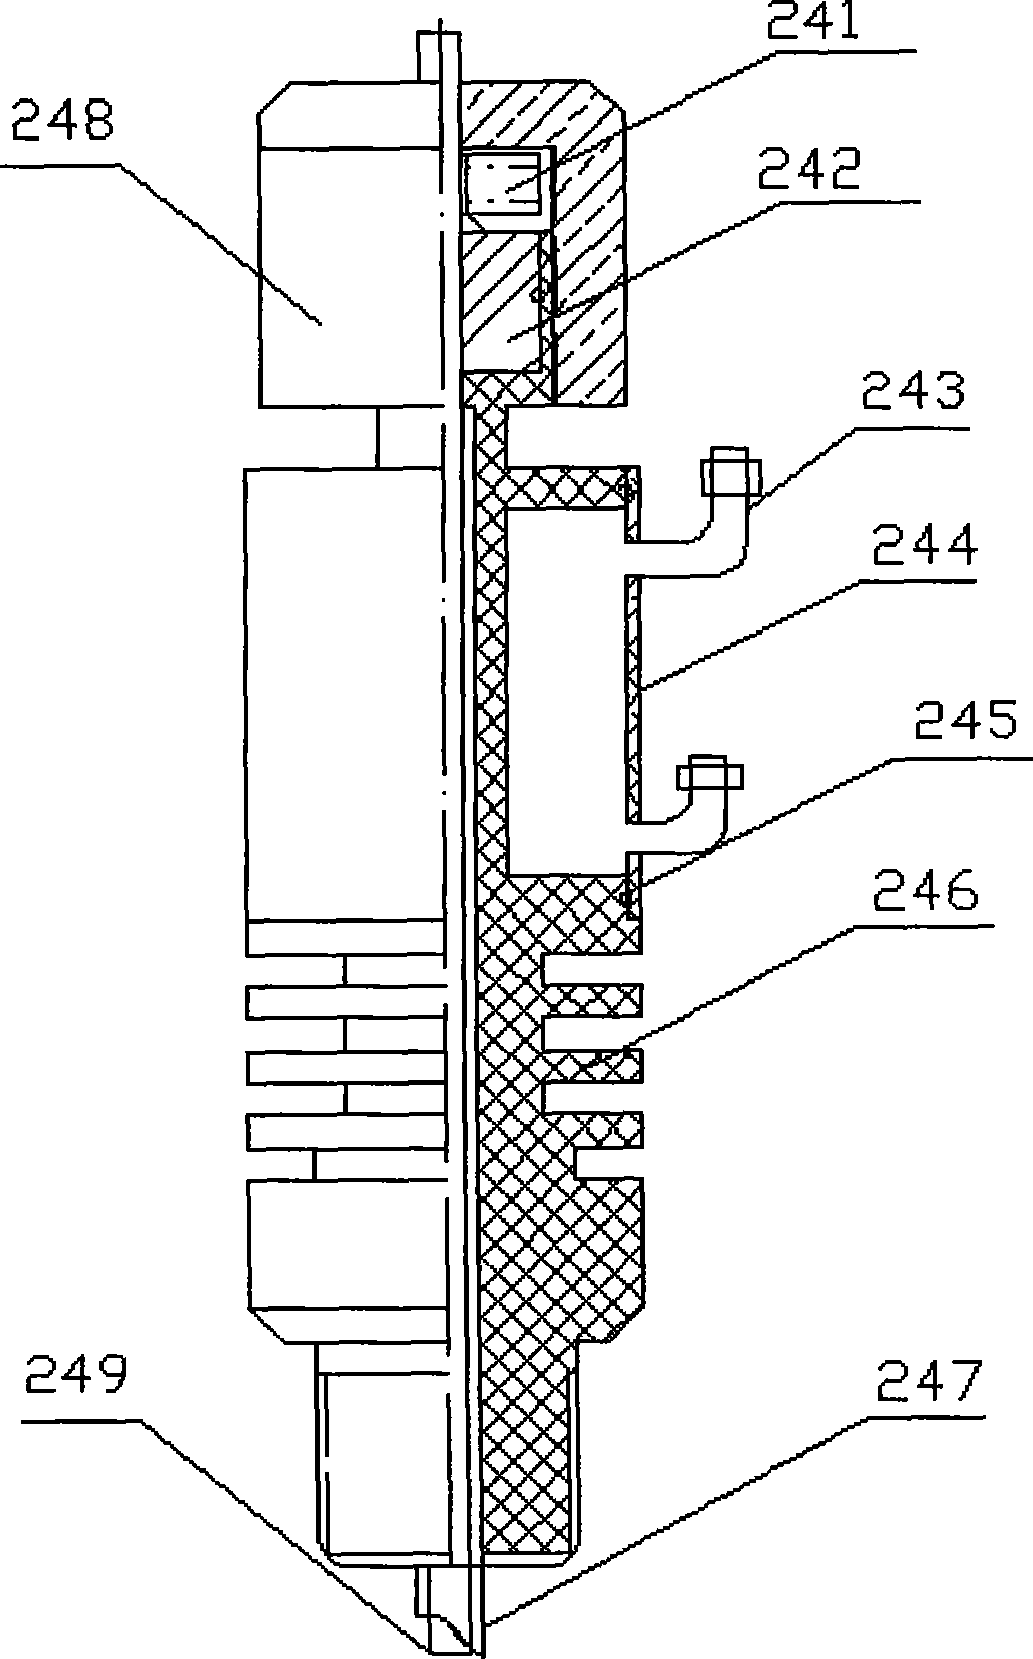 Experimental facility for testing electrochemical signals of various materials in high-temperature high-pressure environment